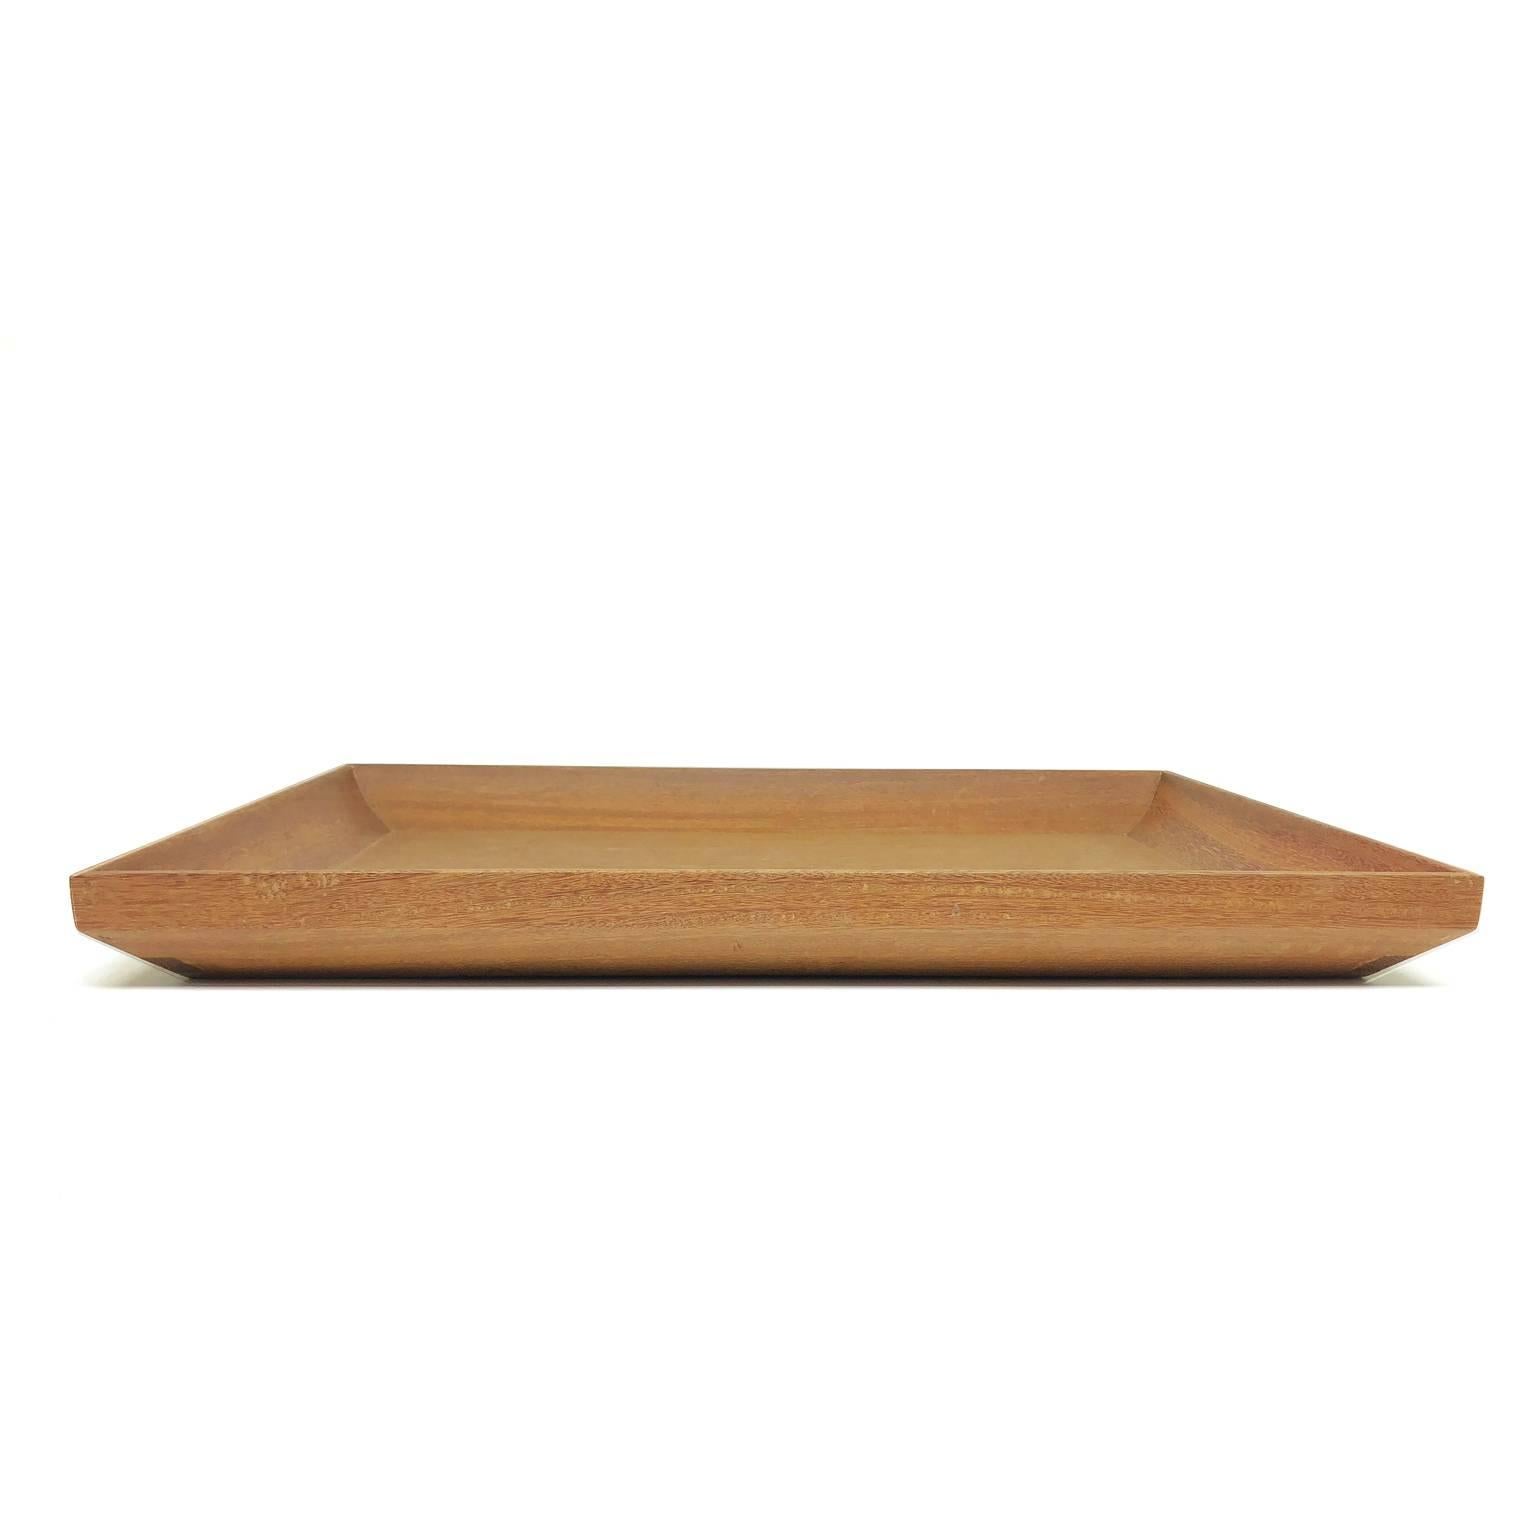 The frame of tray is made in Brazilian solid wood Cumaru with traditional handcraft joint techniques. The base is veneered with natural wood. Finishing in Italian acrylic matte varnish that shows the beauty of wood.